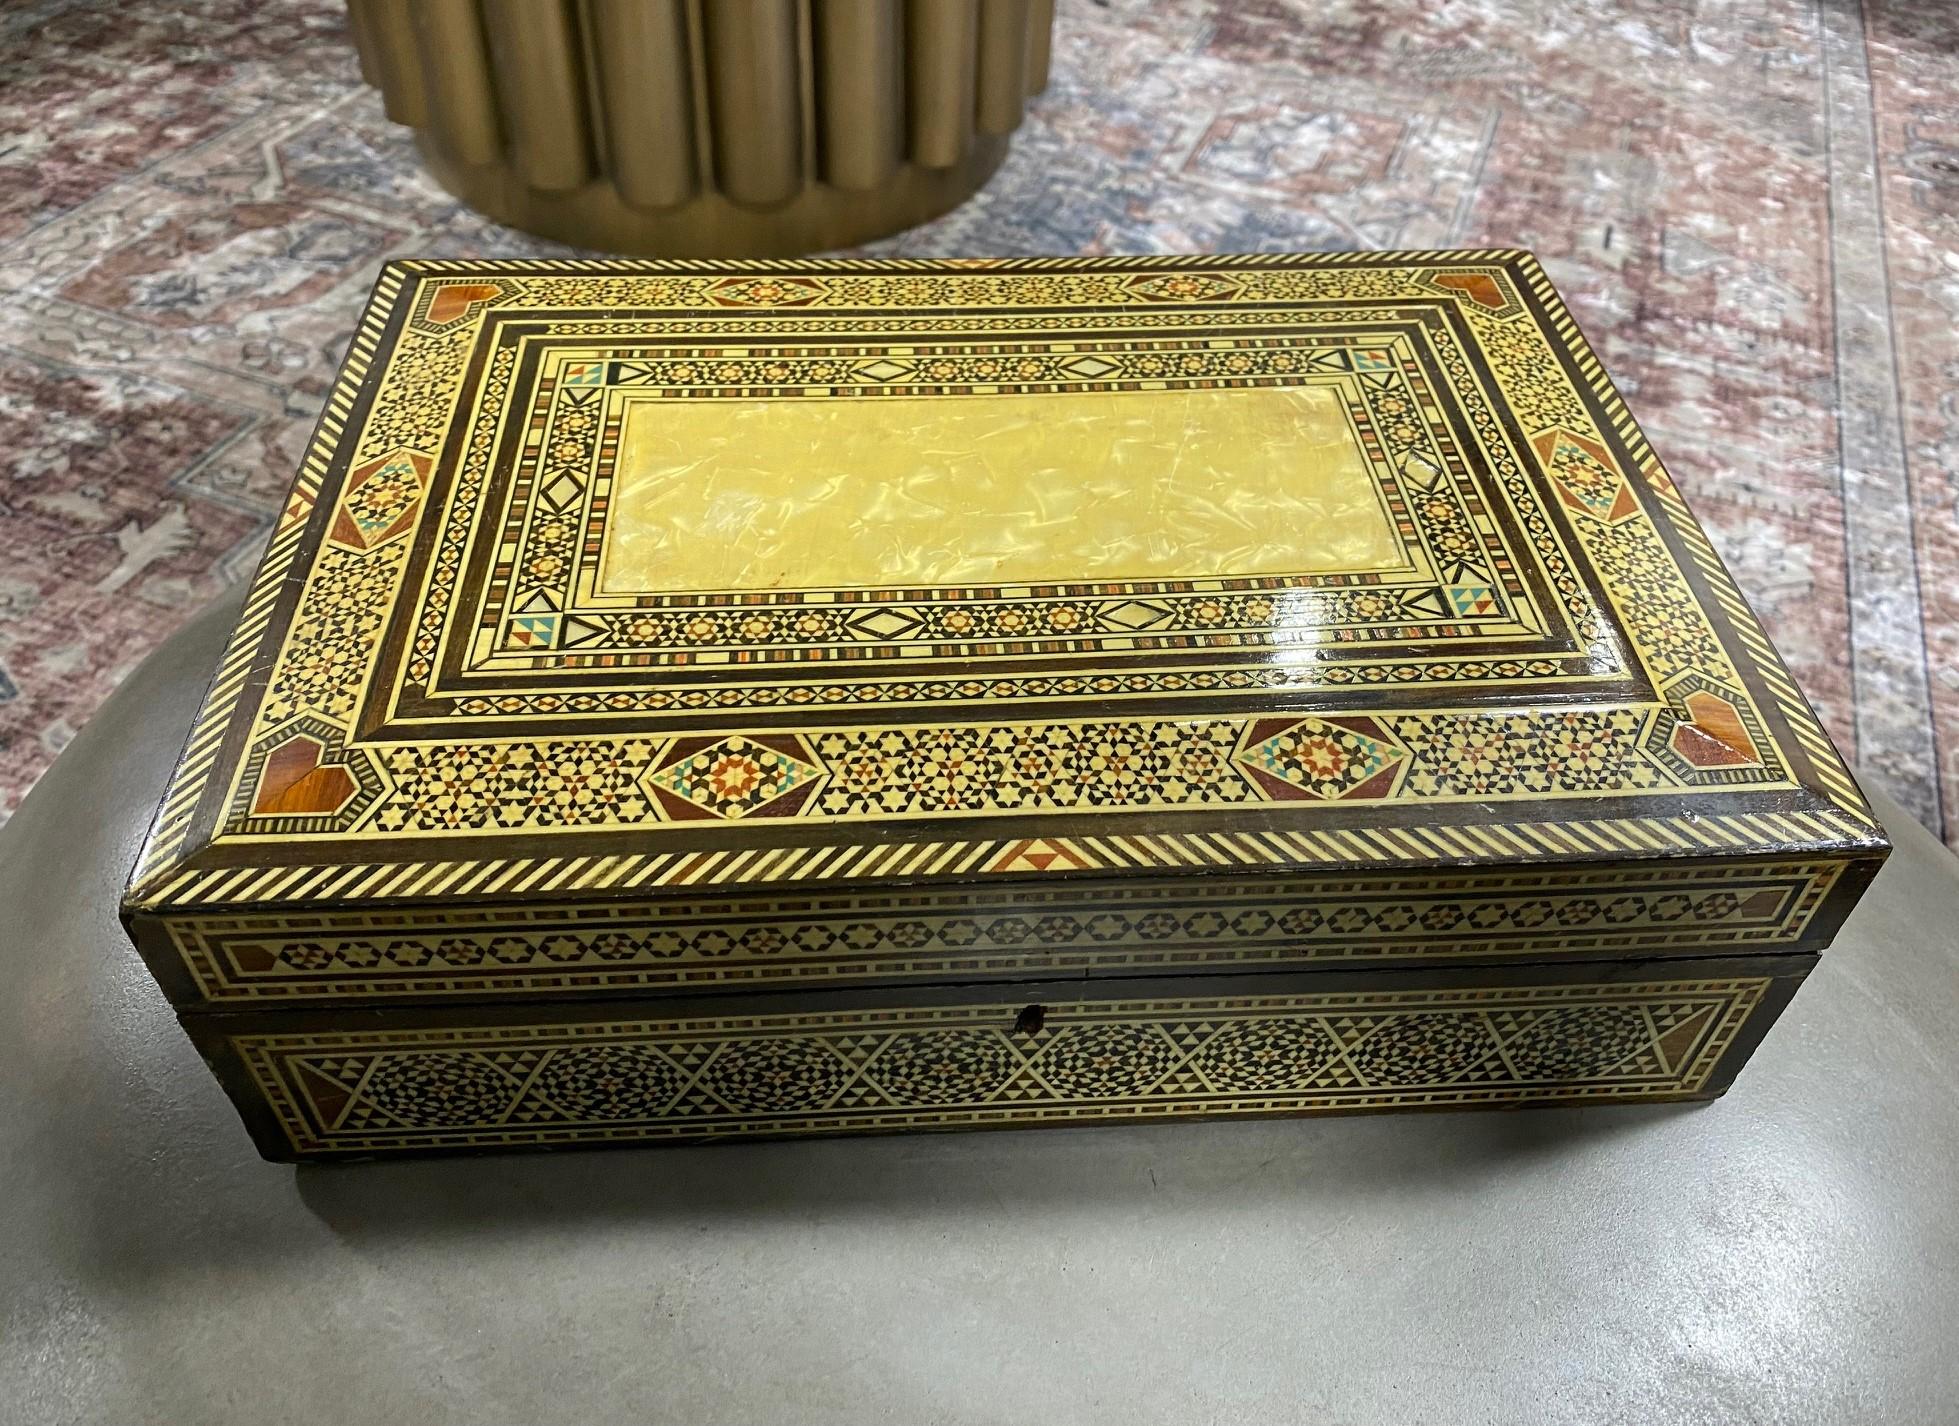 Stunning mosaic design, this intricate quite large wood jewelry box is made from multiple micro pieces of wood, mother of pearl with some possible bone inlays. Gorgeous craftsmanship. A true work of art. 

Small key included. 

Would be a great